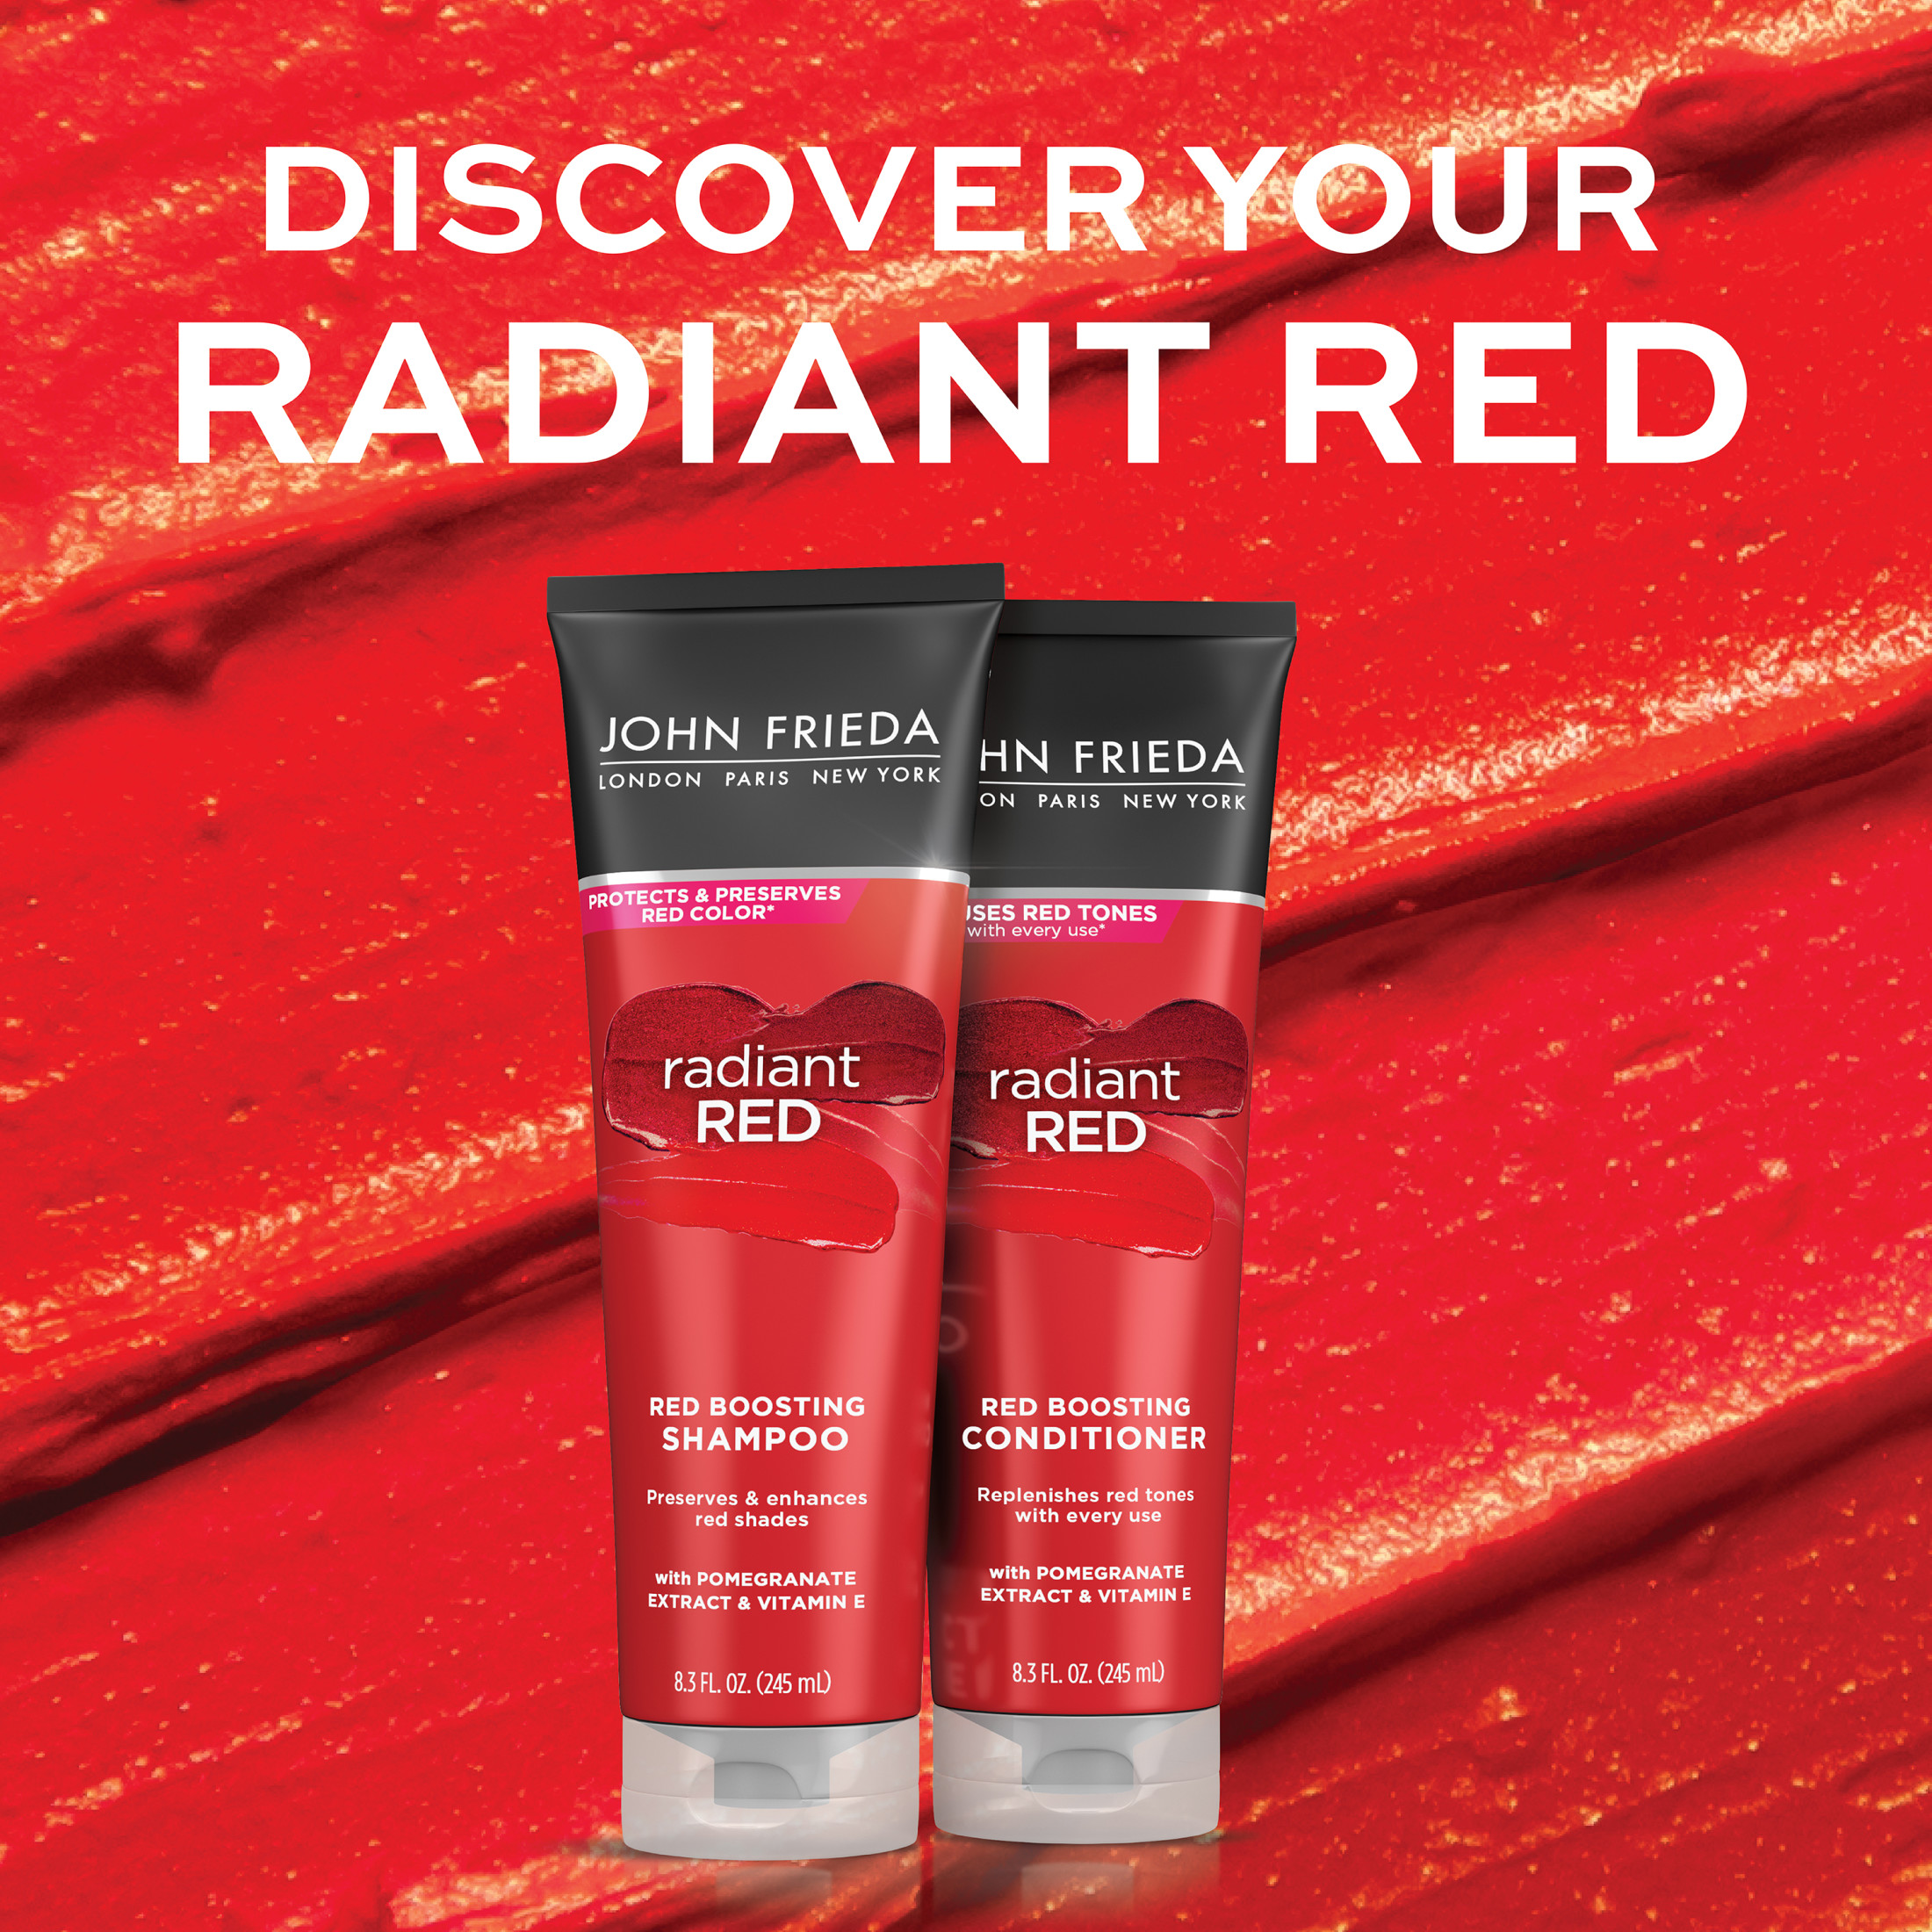 John Frieda Radiant Red Red Boosting Daily Shampoo, Color-Enhancing Shampoo for Red Hair, 8.3 fl oz - image 5 of 8